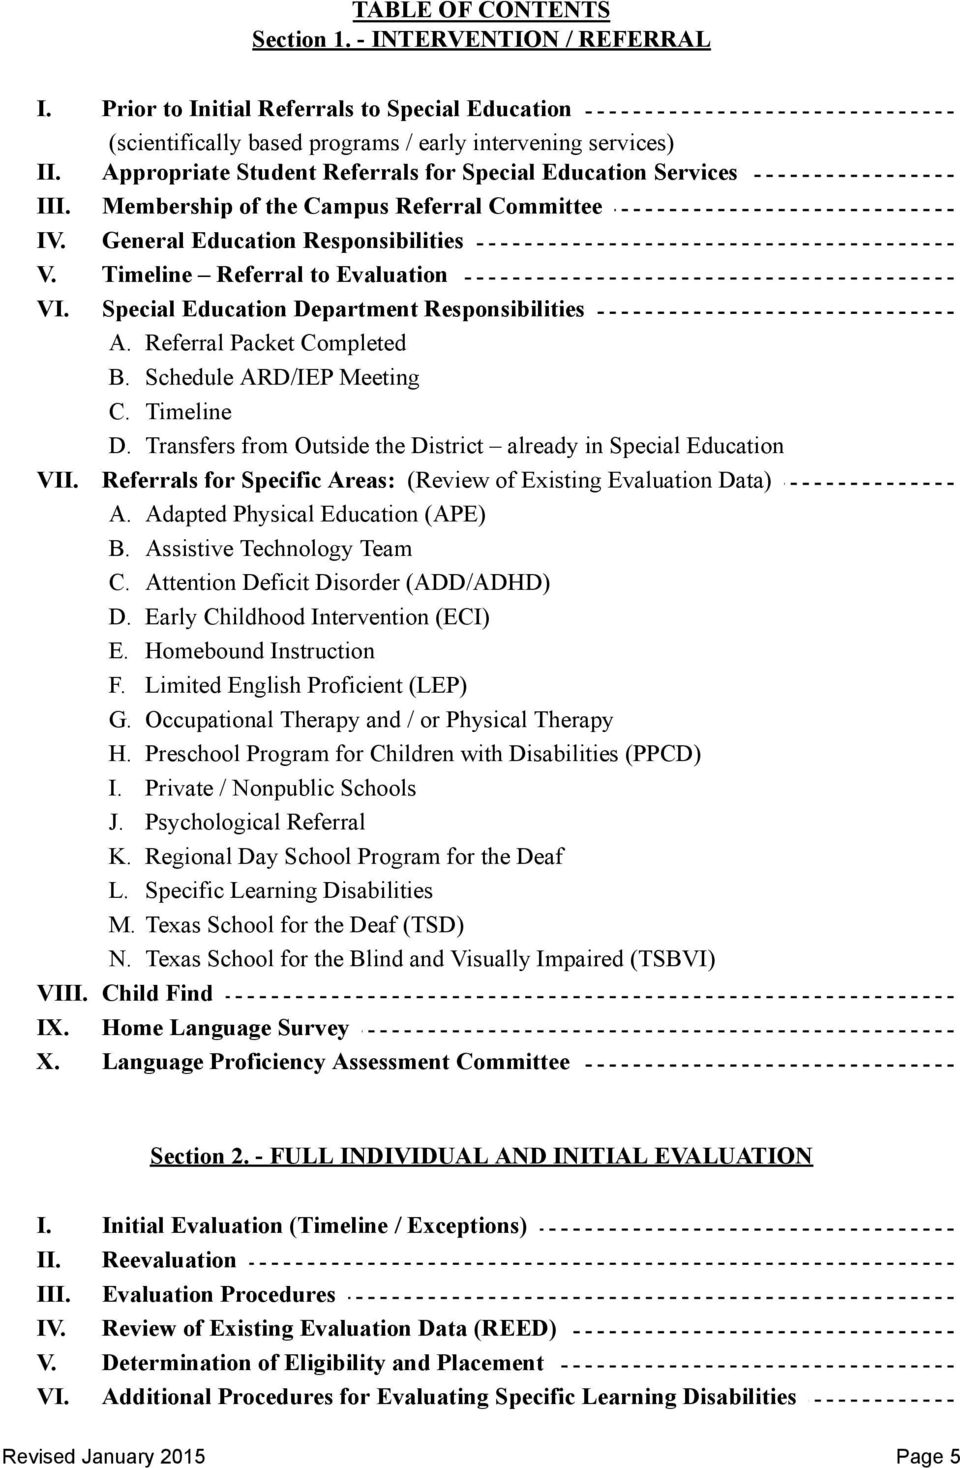 Special Education Department Responsibilities A. Referral Packet Completed B. Schedule ARD/IEP Meeting C. Timeline D. Transfers from Outside the District already in Special Education VII.